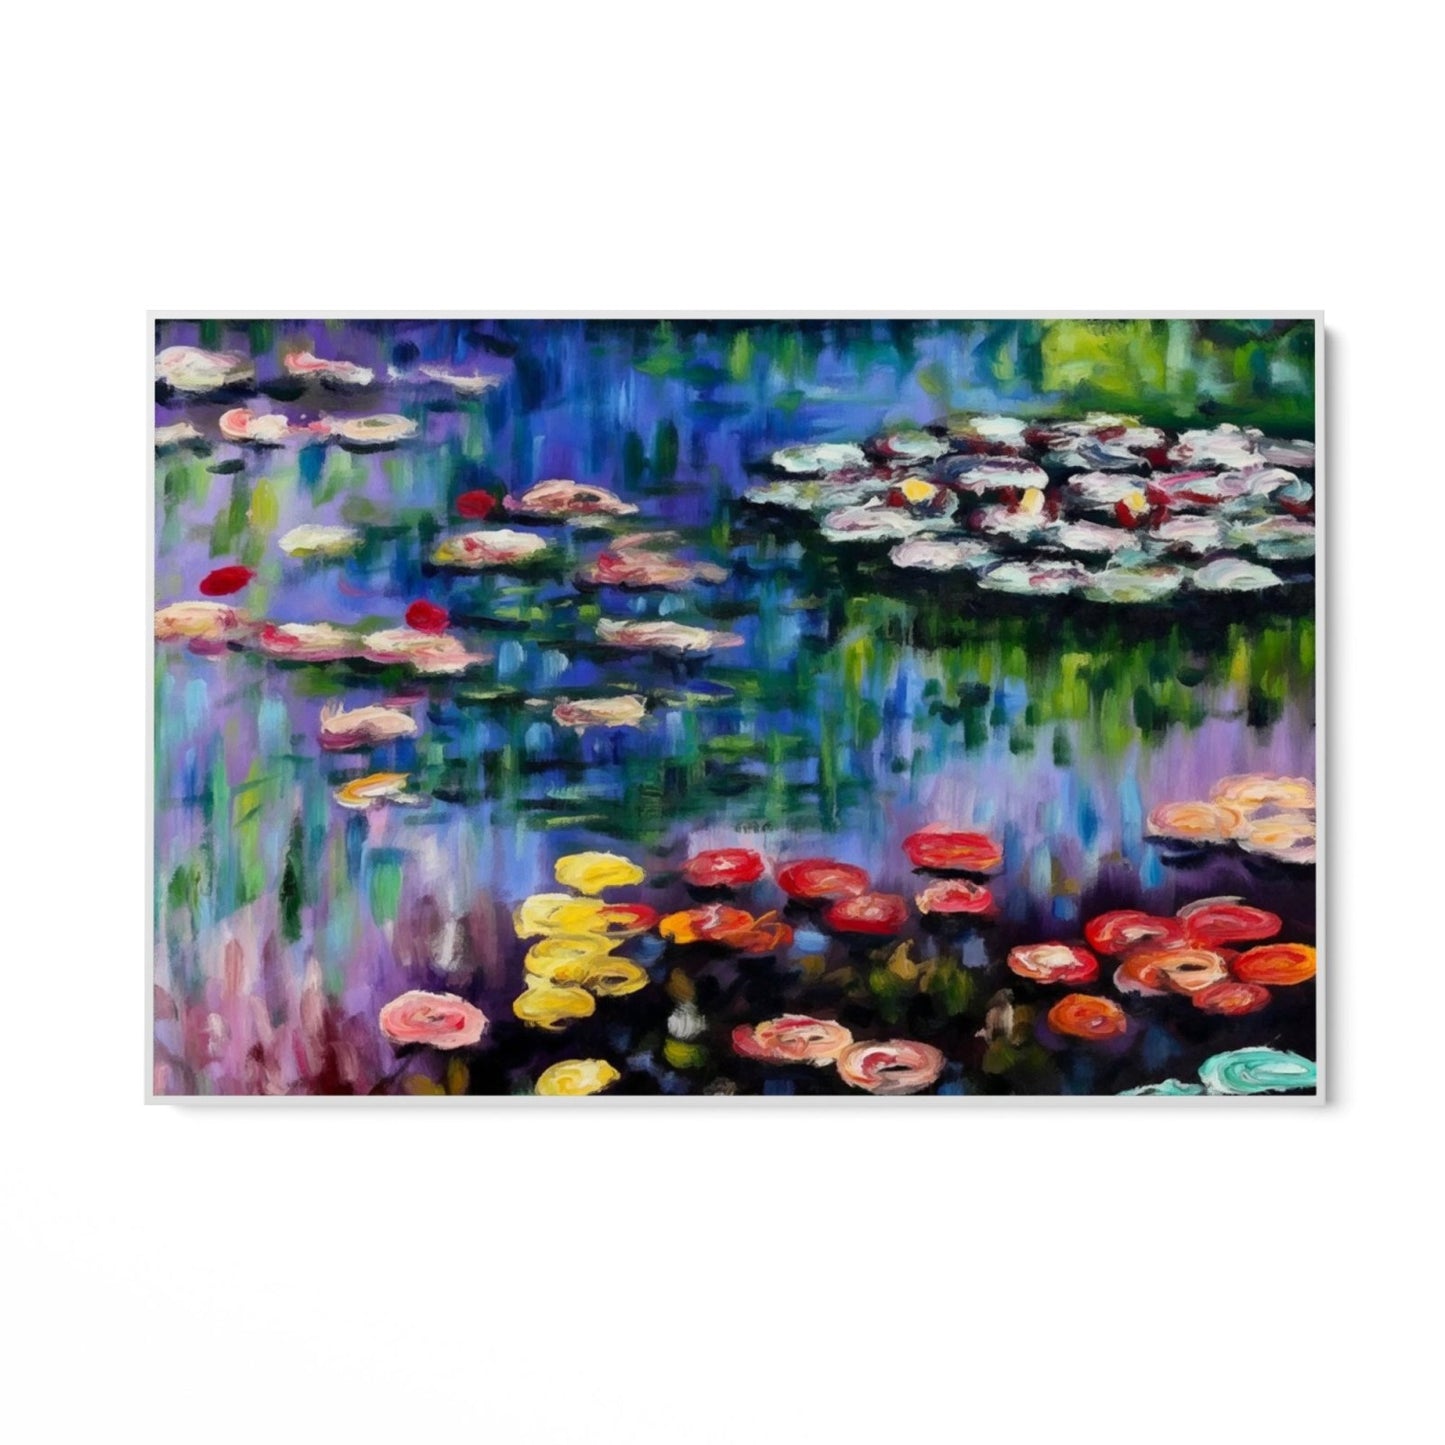 Water Lilies in the Pond at Giverny - Claude Monet